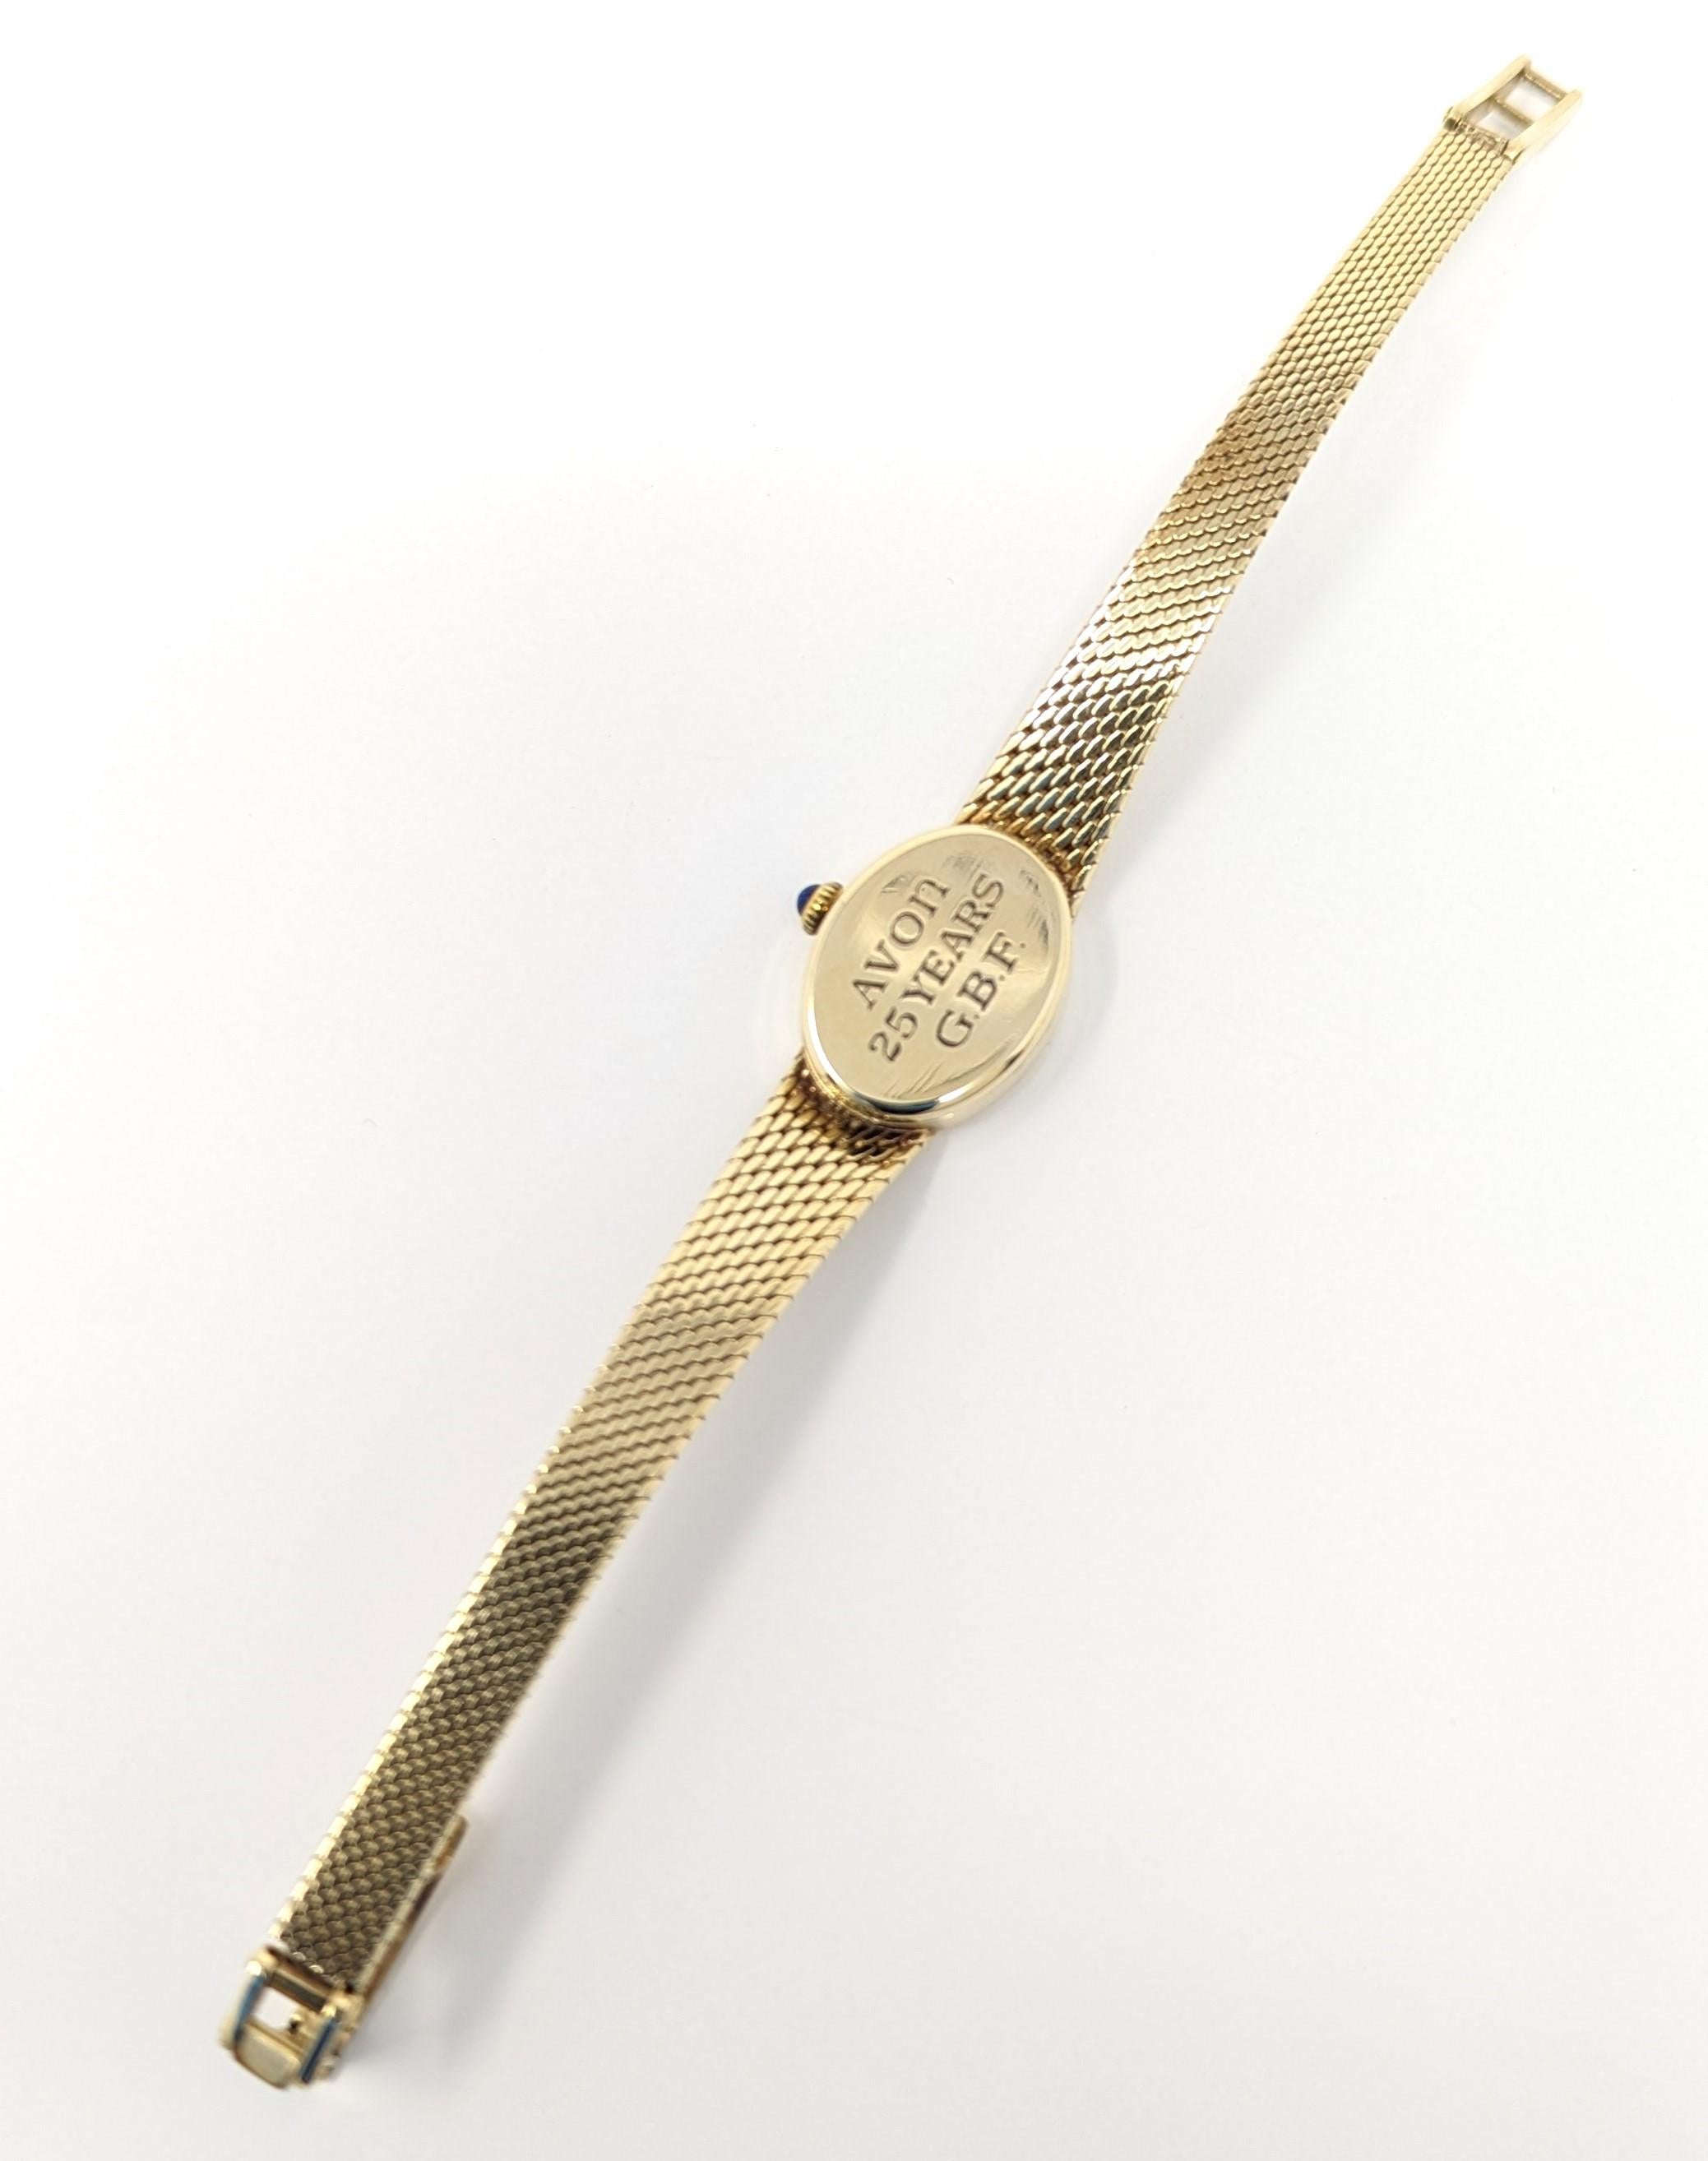 Vintage 14k Tiffany & Co Watch Mesh Band Solid Yellow Gold Ladies Award Signed In Fair Condition For Sale In Greer, SC